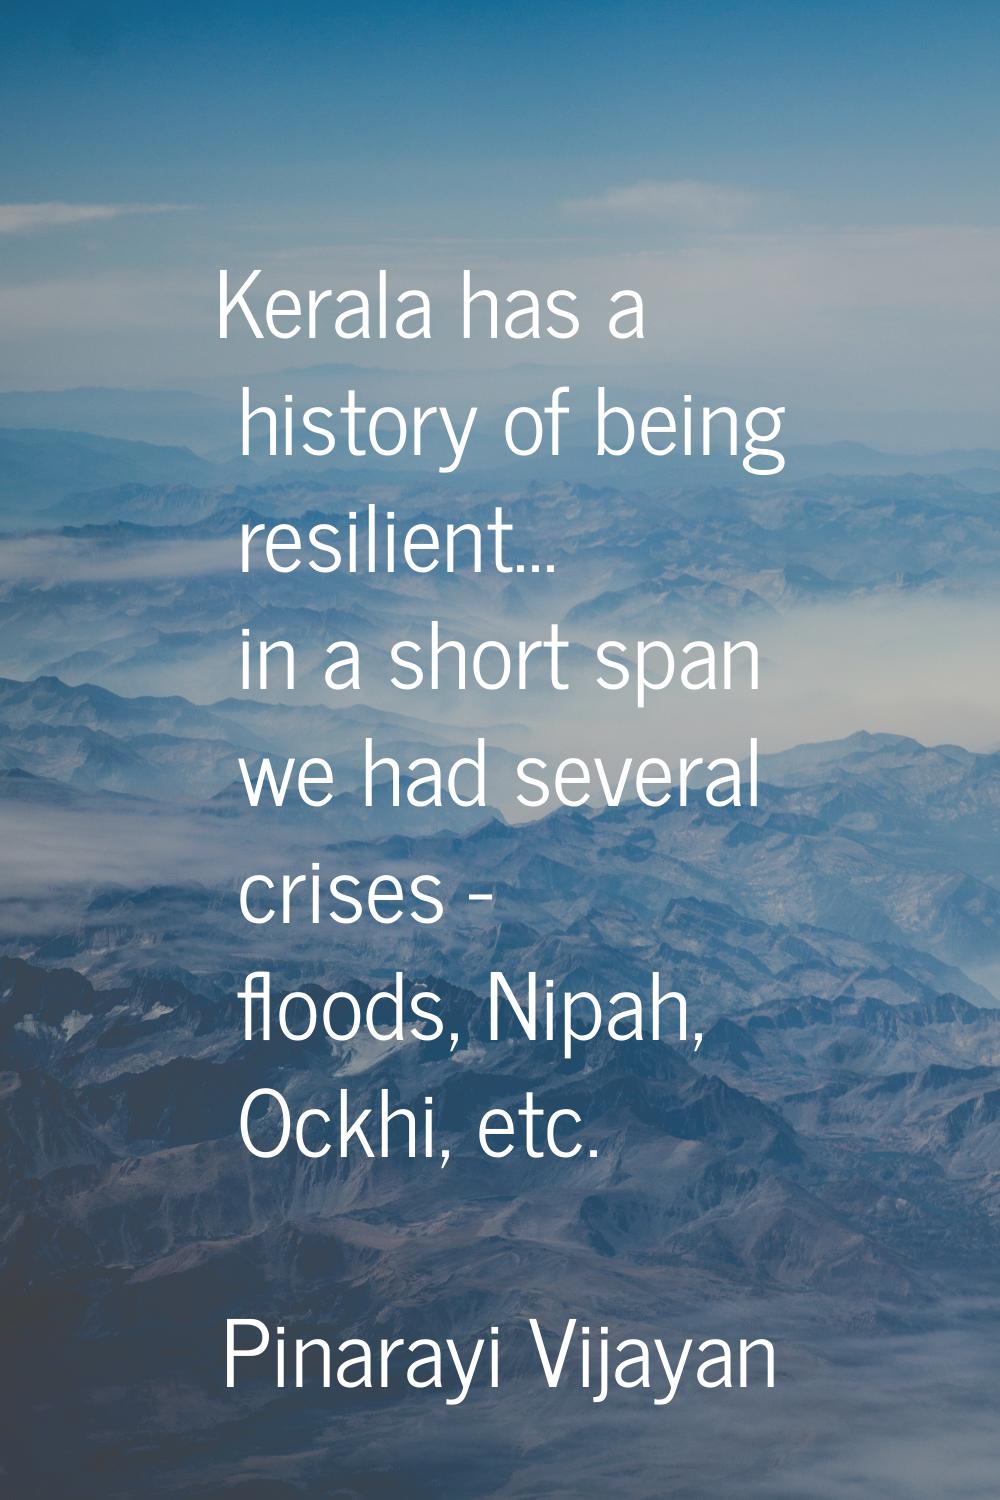 Kerala has a history of being resilient... in a short span we had several crises - floods, Nipah, O